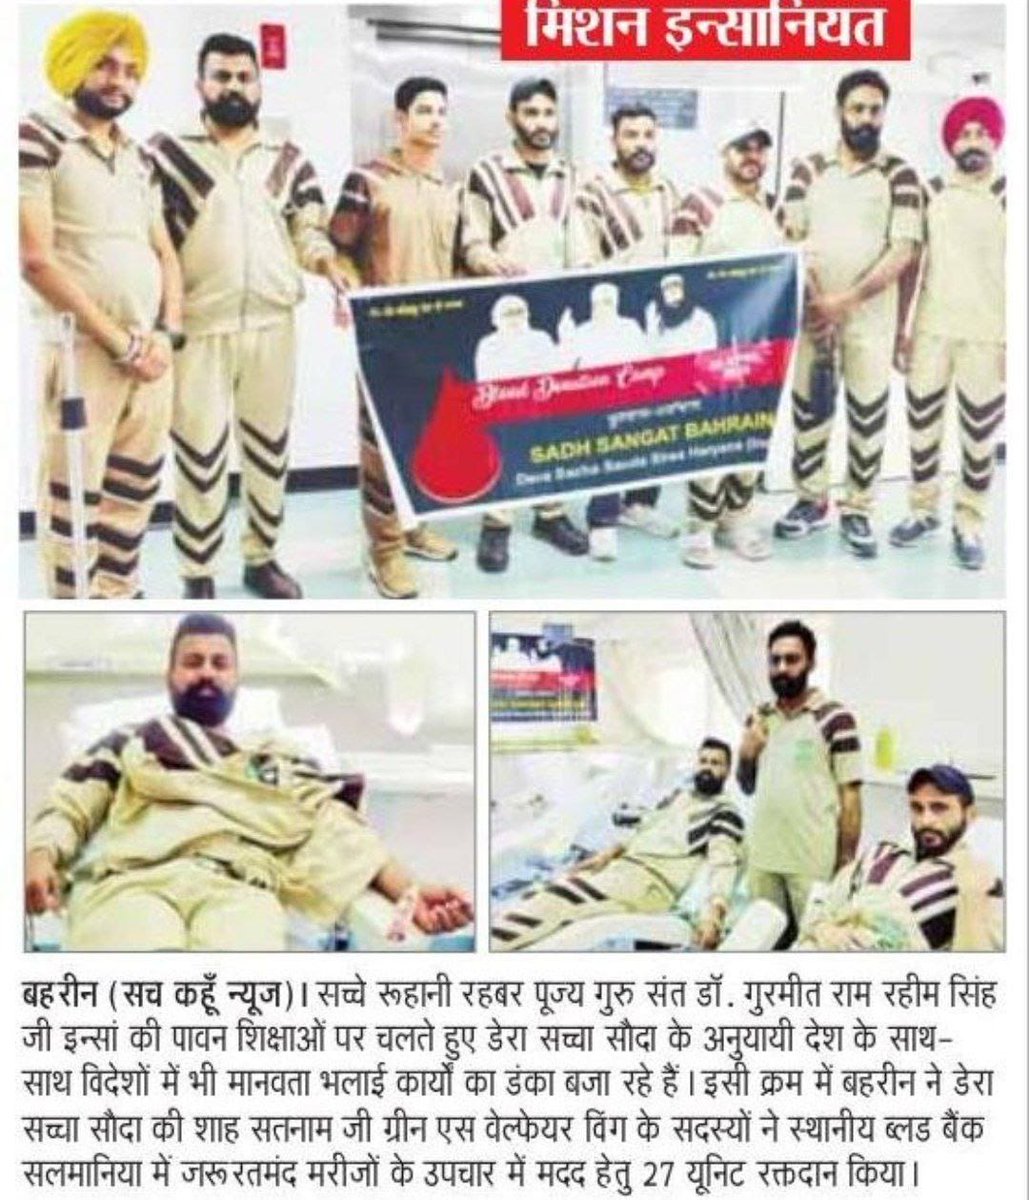 In this selfish era, no one likes to talk without any reason.But DSS volunteers donate blood , and they are known as 'True Blood Pumps'.He donates blood every 3 months, he also took a pledge to do so: Under the guidance of Ram Rahim Ji
#BeALifeSaver